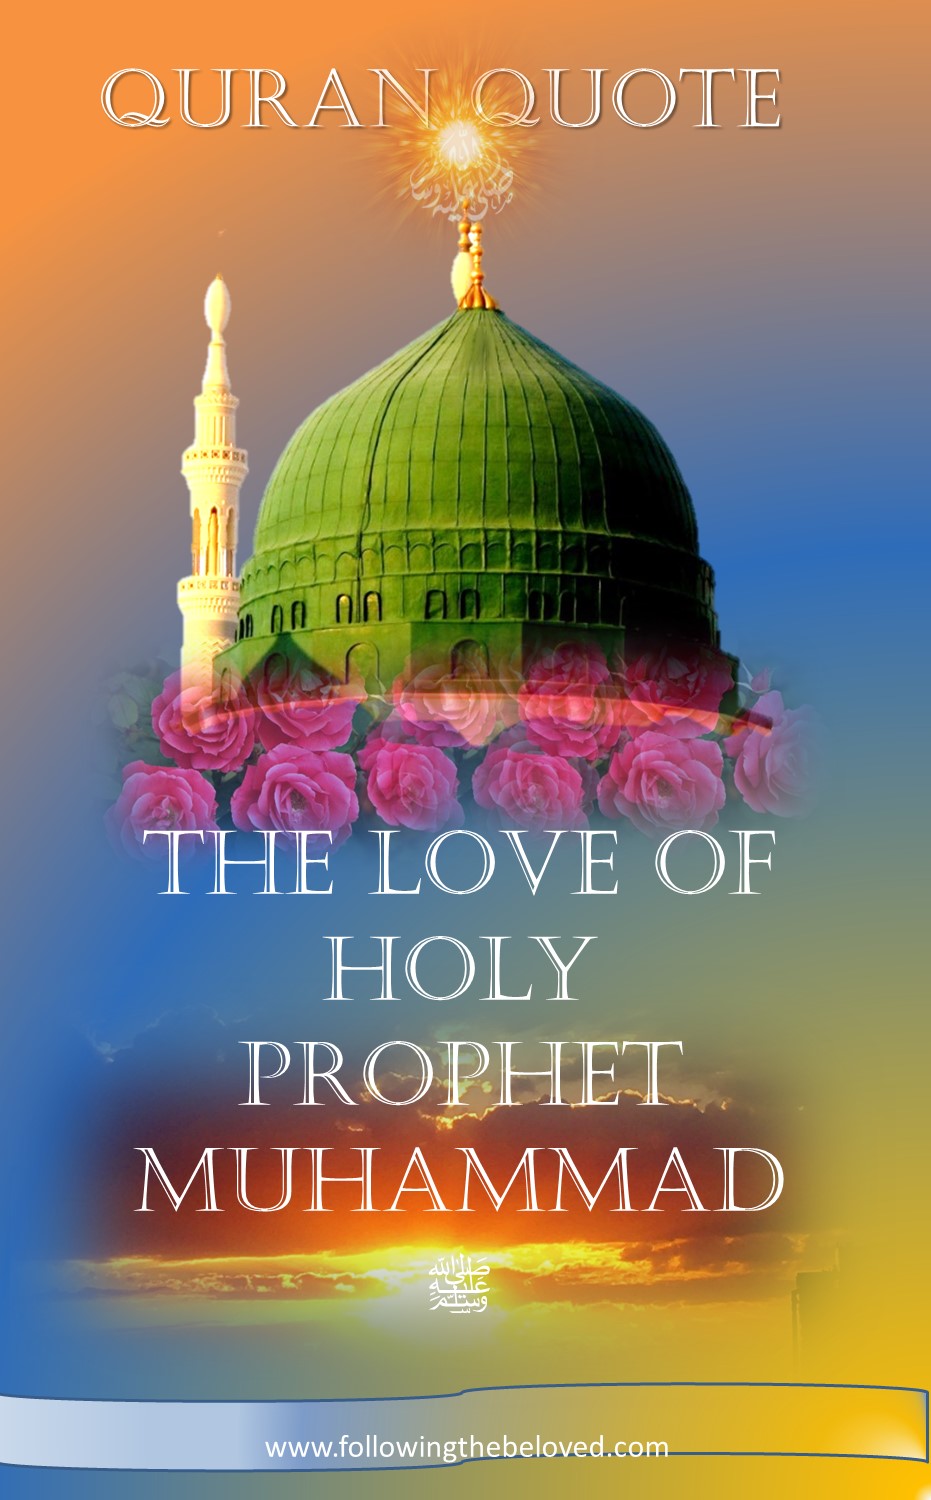 essay on love of holy prophet for the youth of ummah